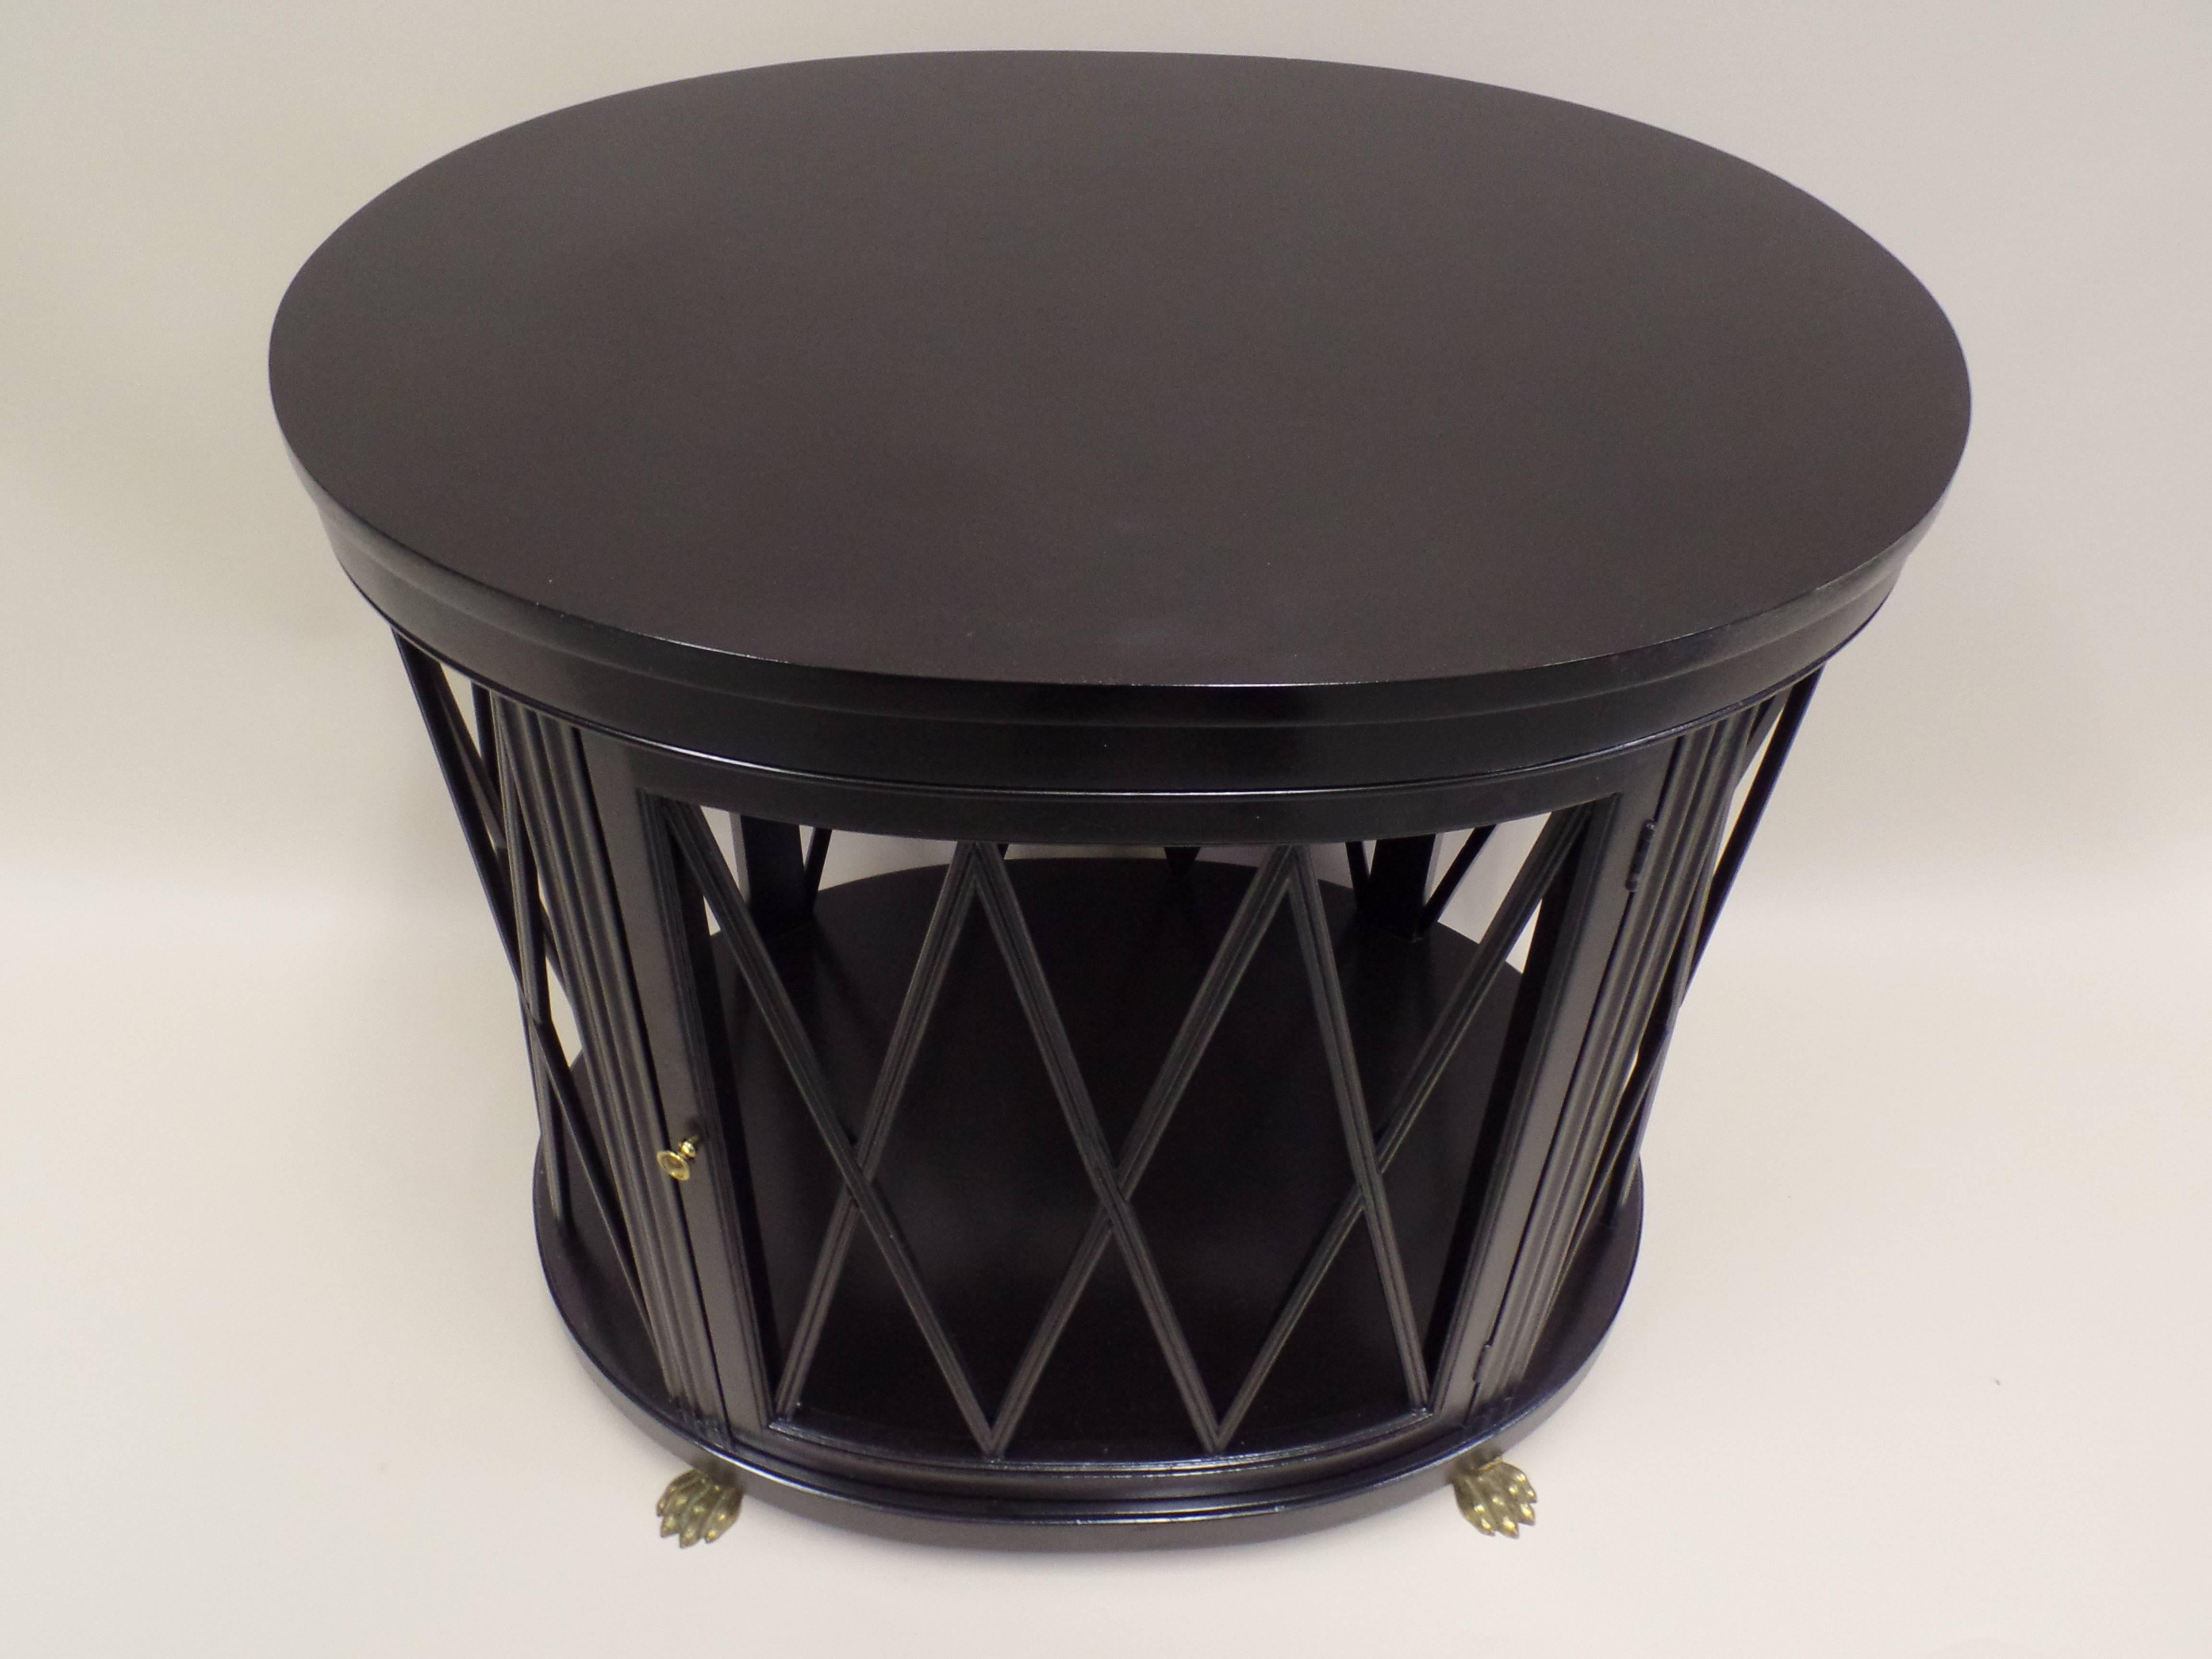 Elegant pair of oval form French Mid-Century Modern Neoclassical Ebonized Wood end tables / sofa tables by Maison Jansen. 

The tables feature a stunning X-frame design around the circumference which allows transparent viewing completely through the